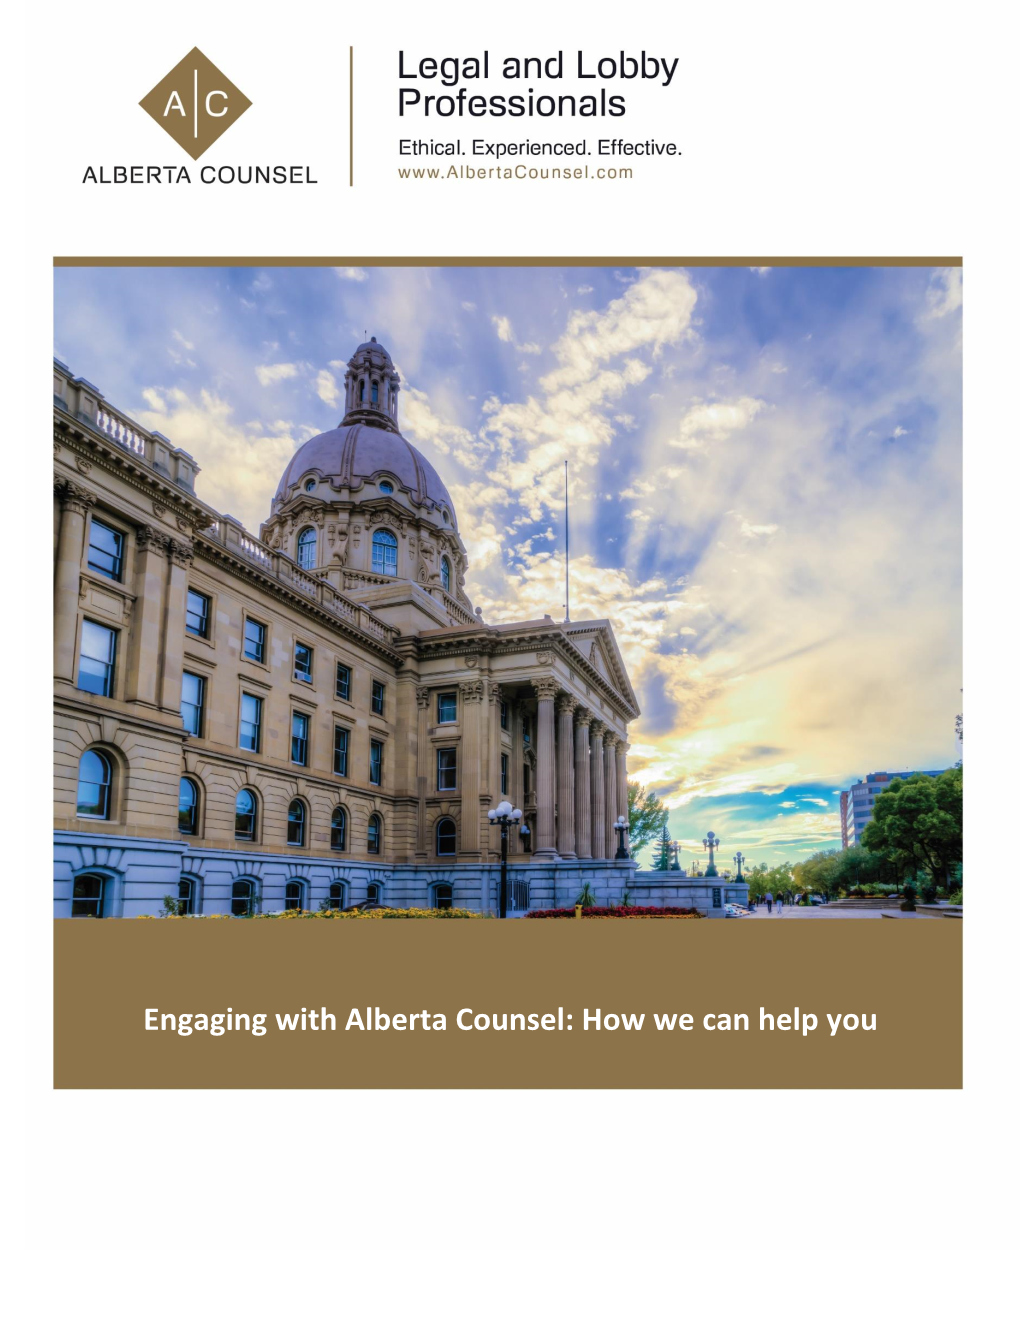 Engaging with Alberta Counsel: How We Can Help You